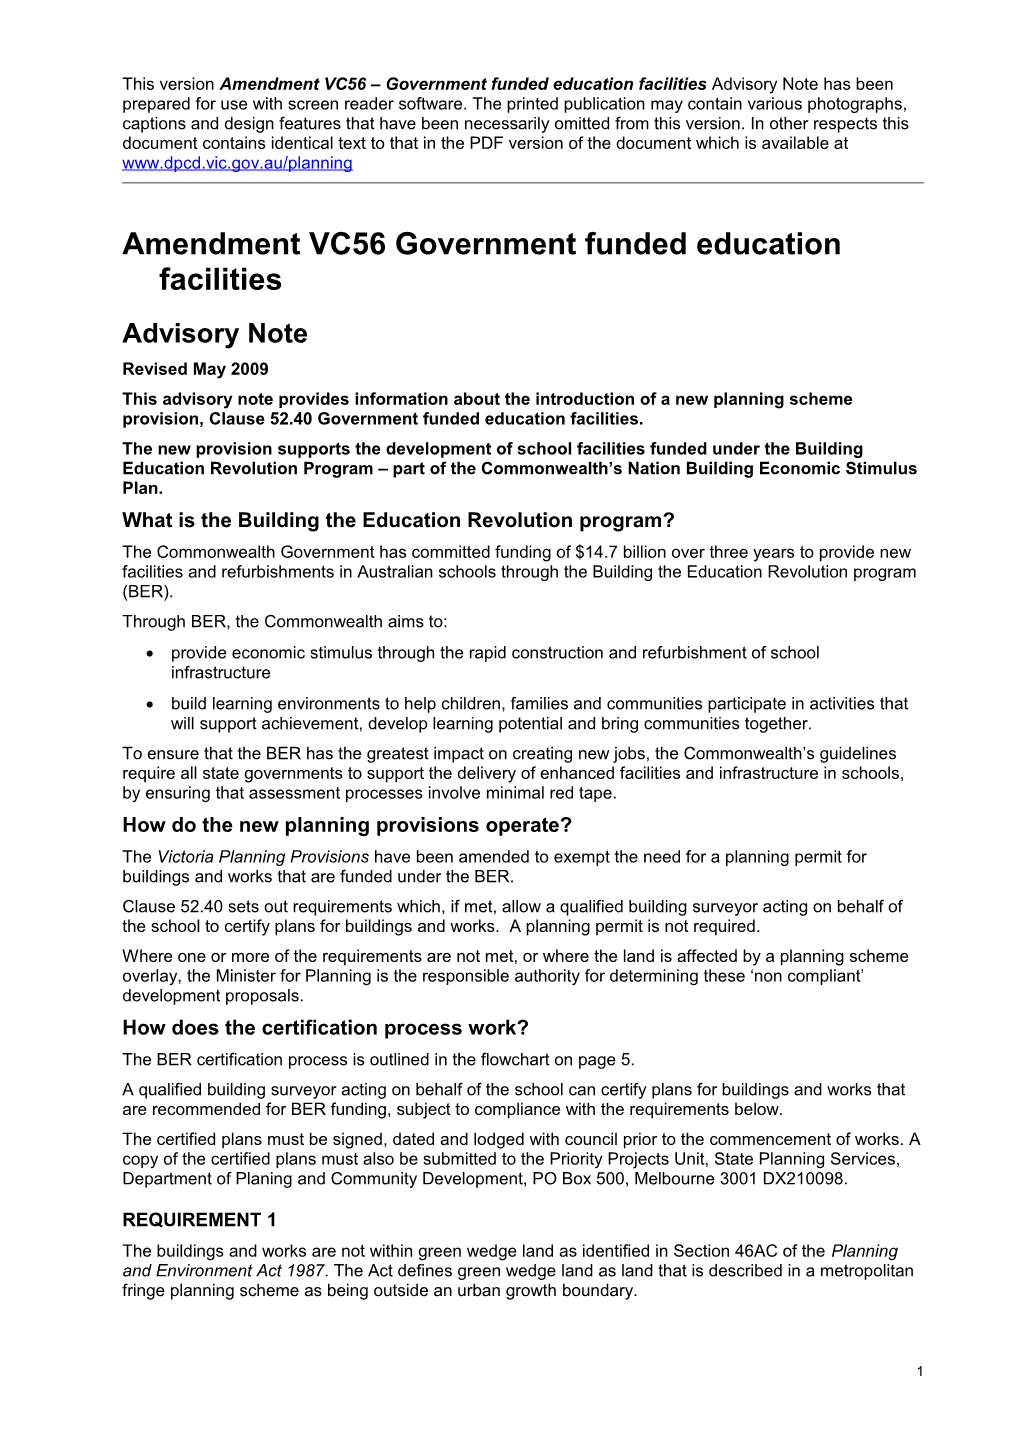 Amendment VC56 Government Funded Education Facilities Advisory Note